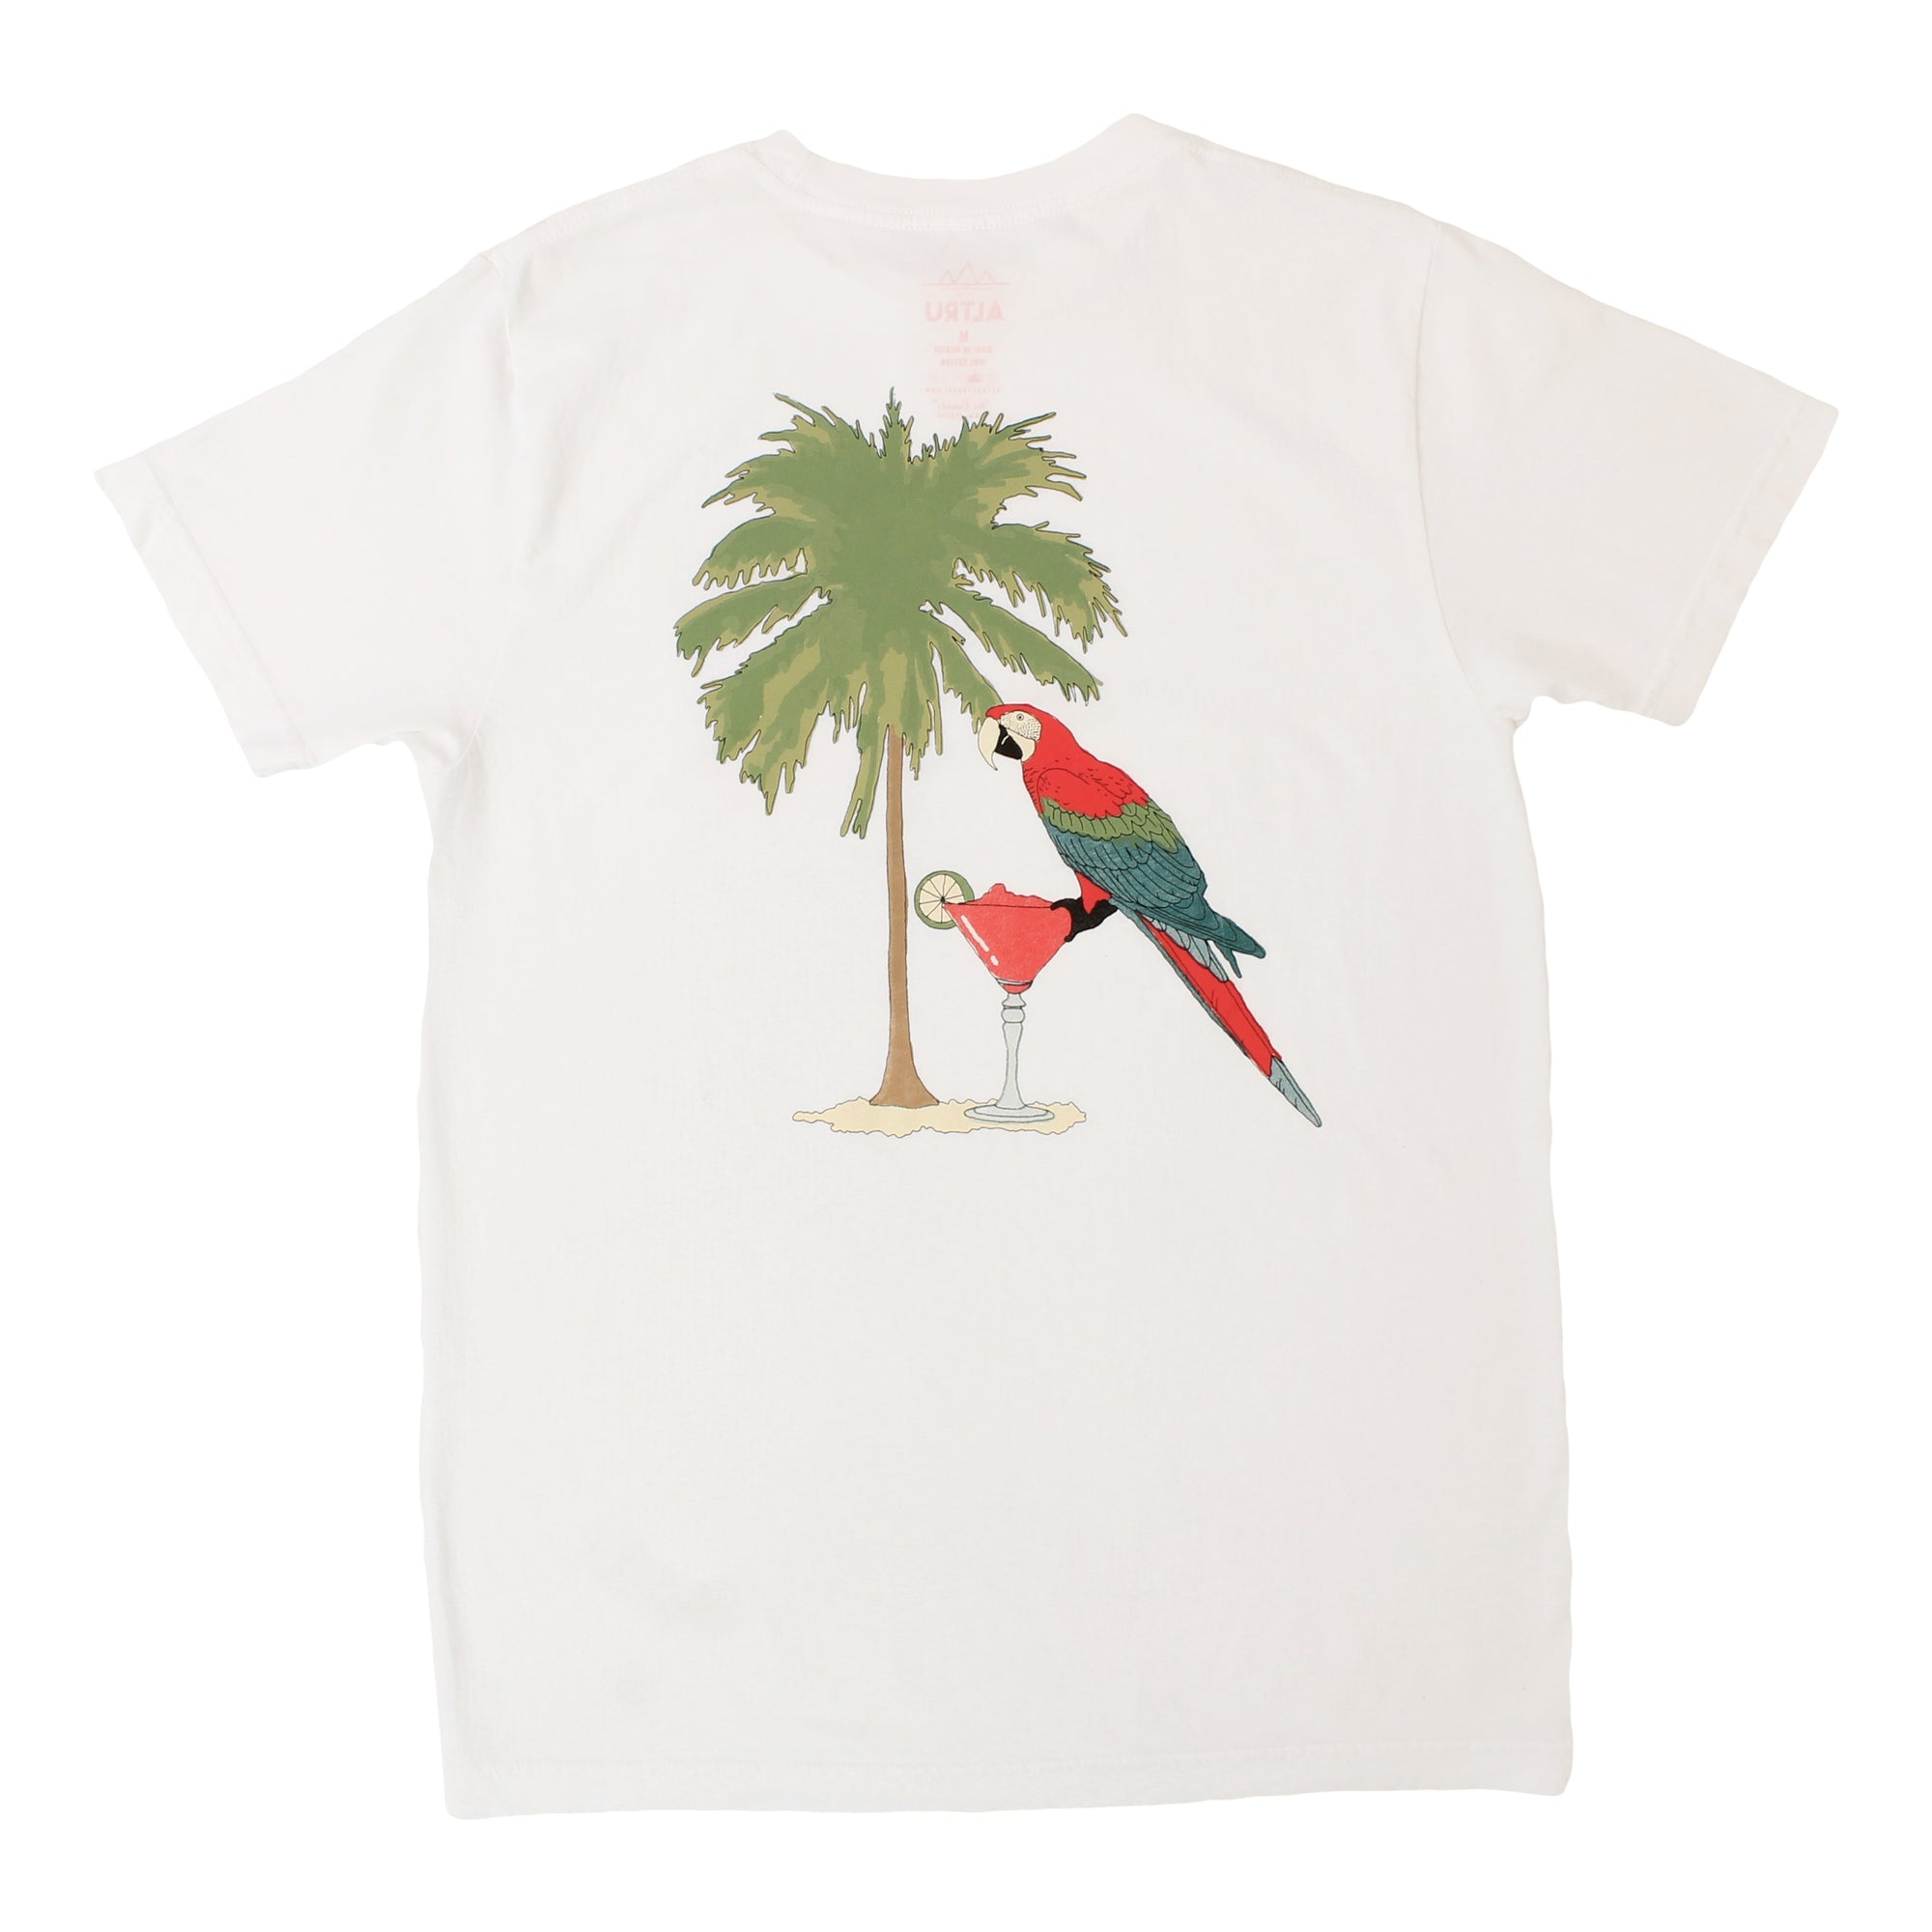 Parrot Tee with the graphic on the back by Altru Apparel